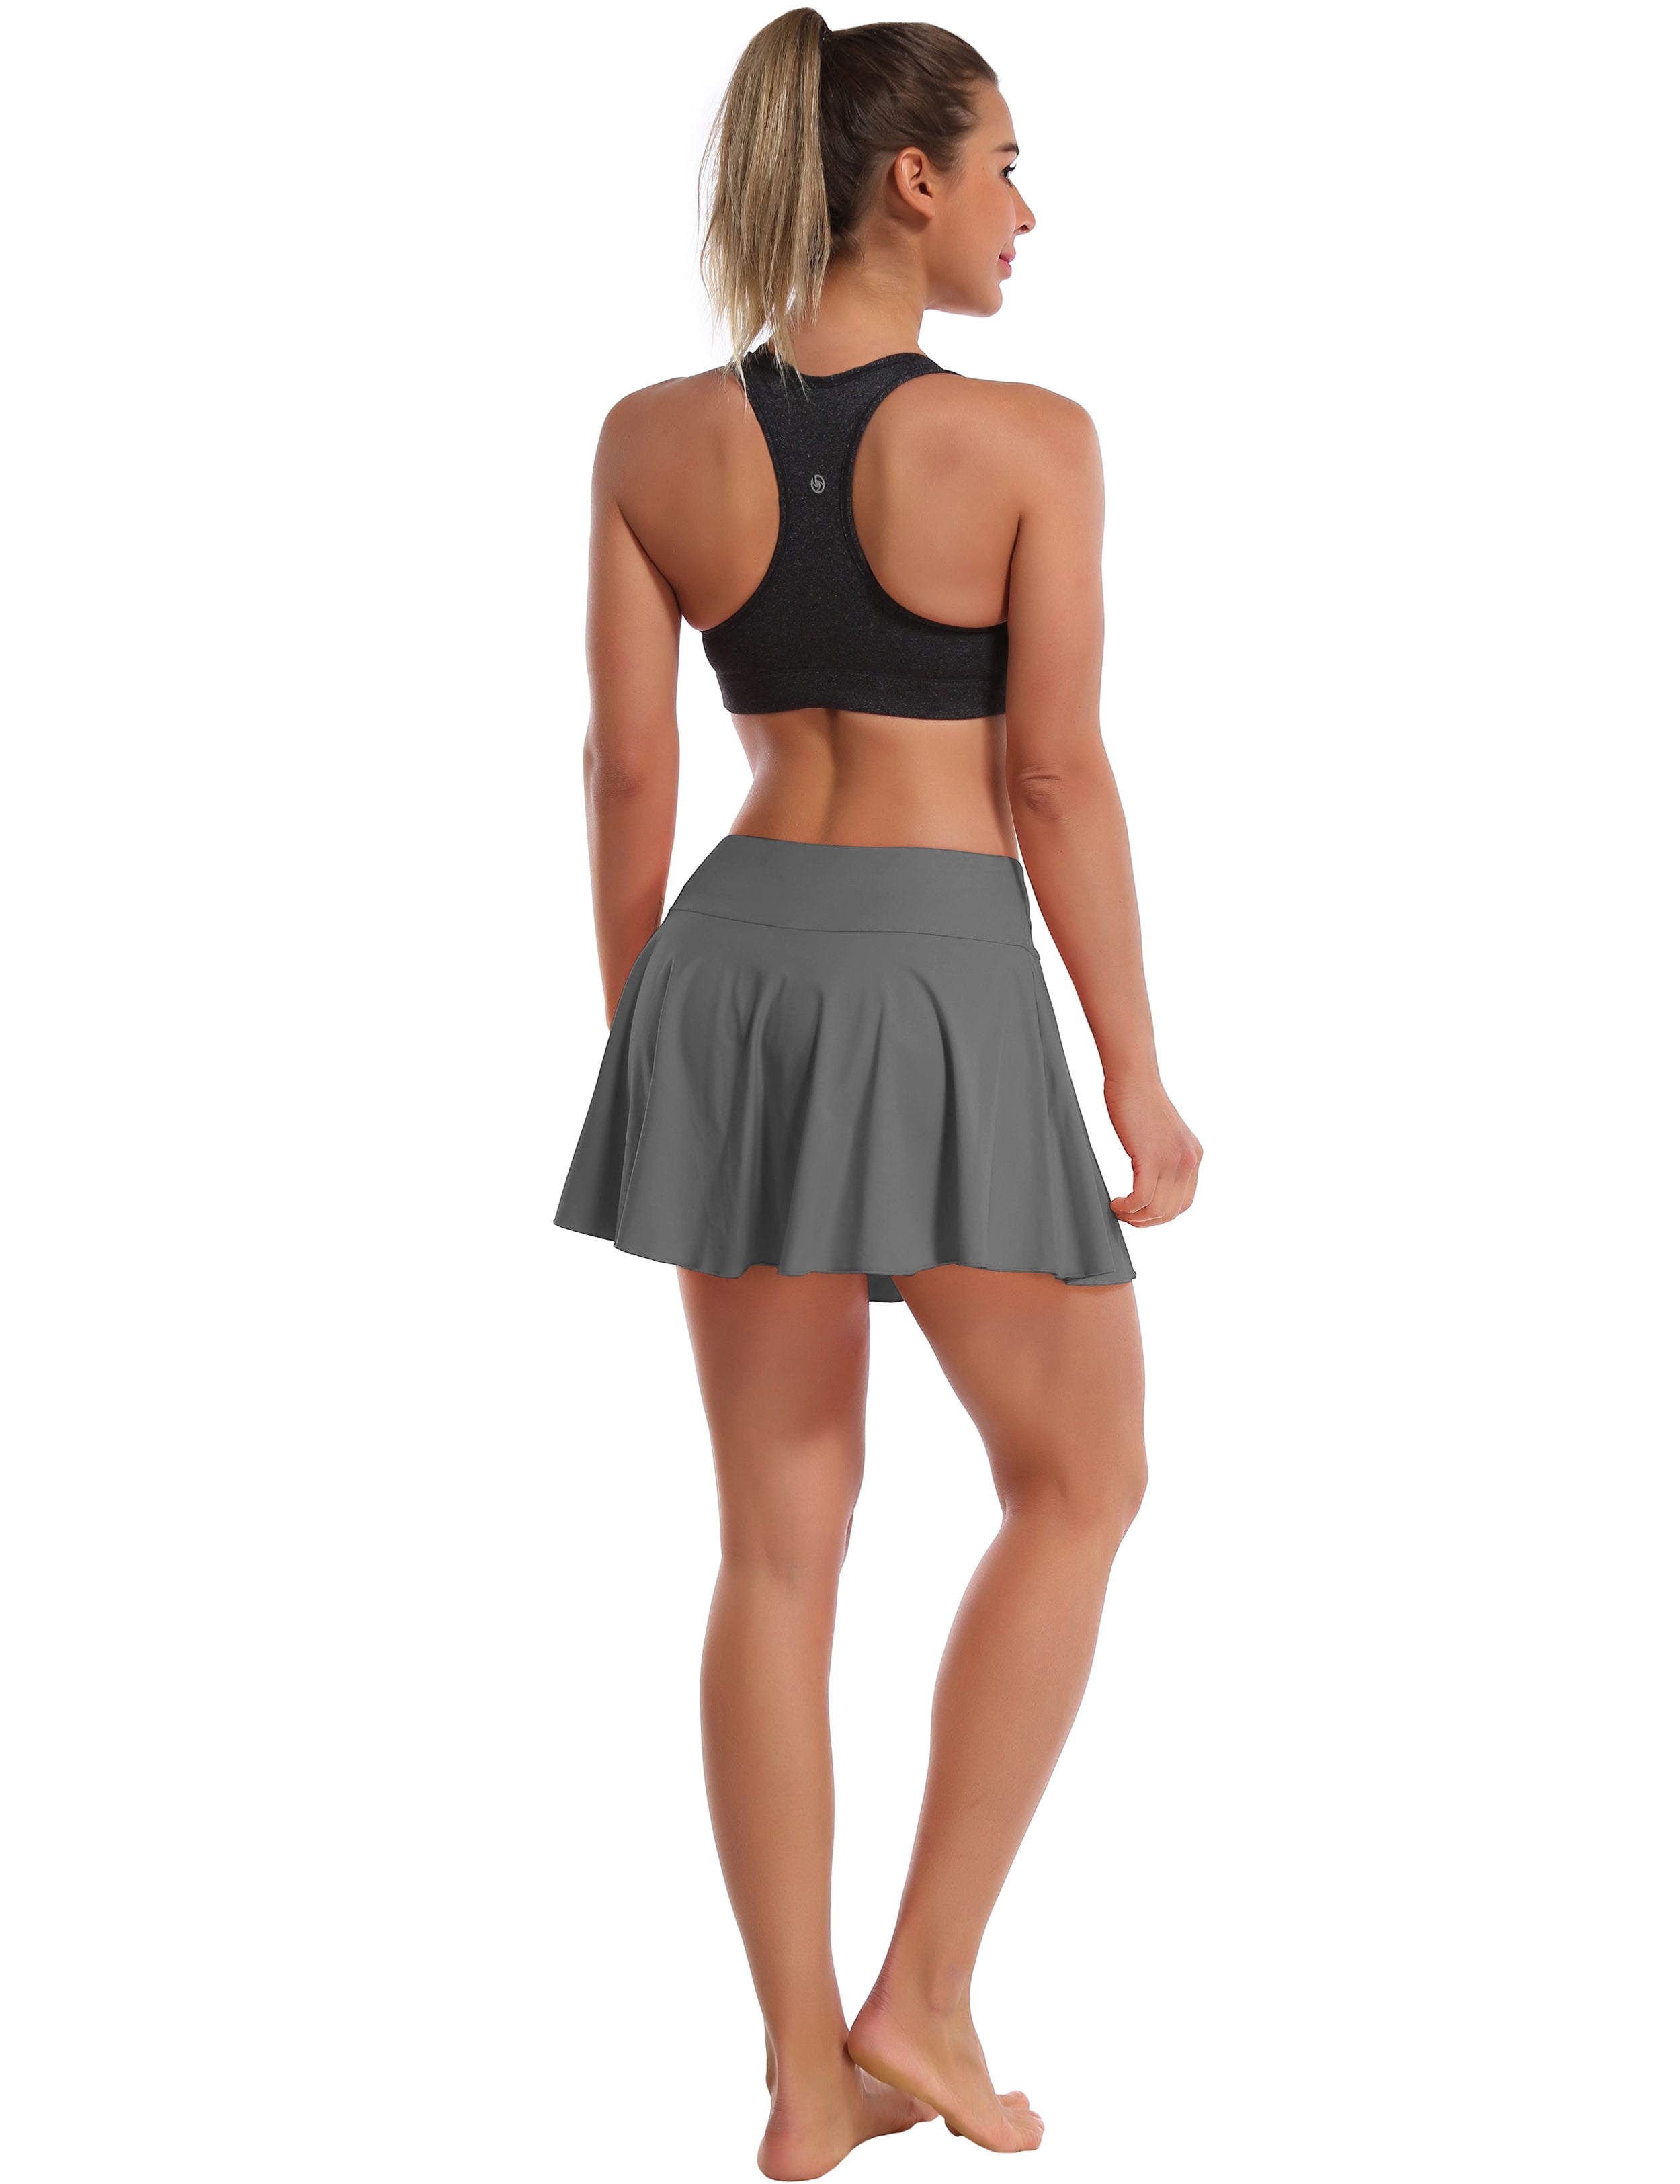 Athletic Tennis Golf Pleated Skort Awith Pocket Shorts gray 80%Nylon/20%Spandex UPF 50+ sun protection Elastic closure Lightweight, Wrinkle Moisture wicking Quick drying Secure & comfortable two layer Hidden pocket